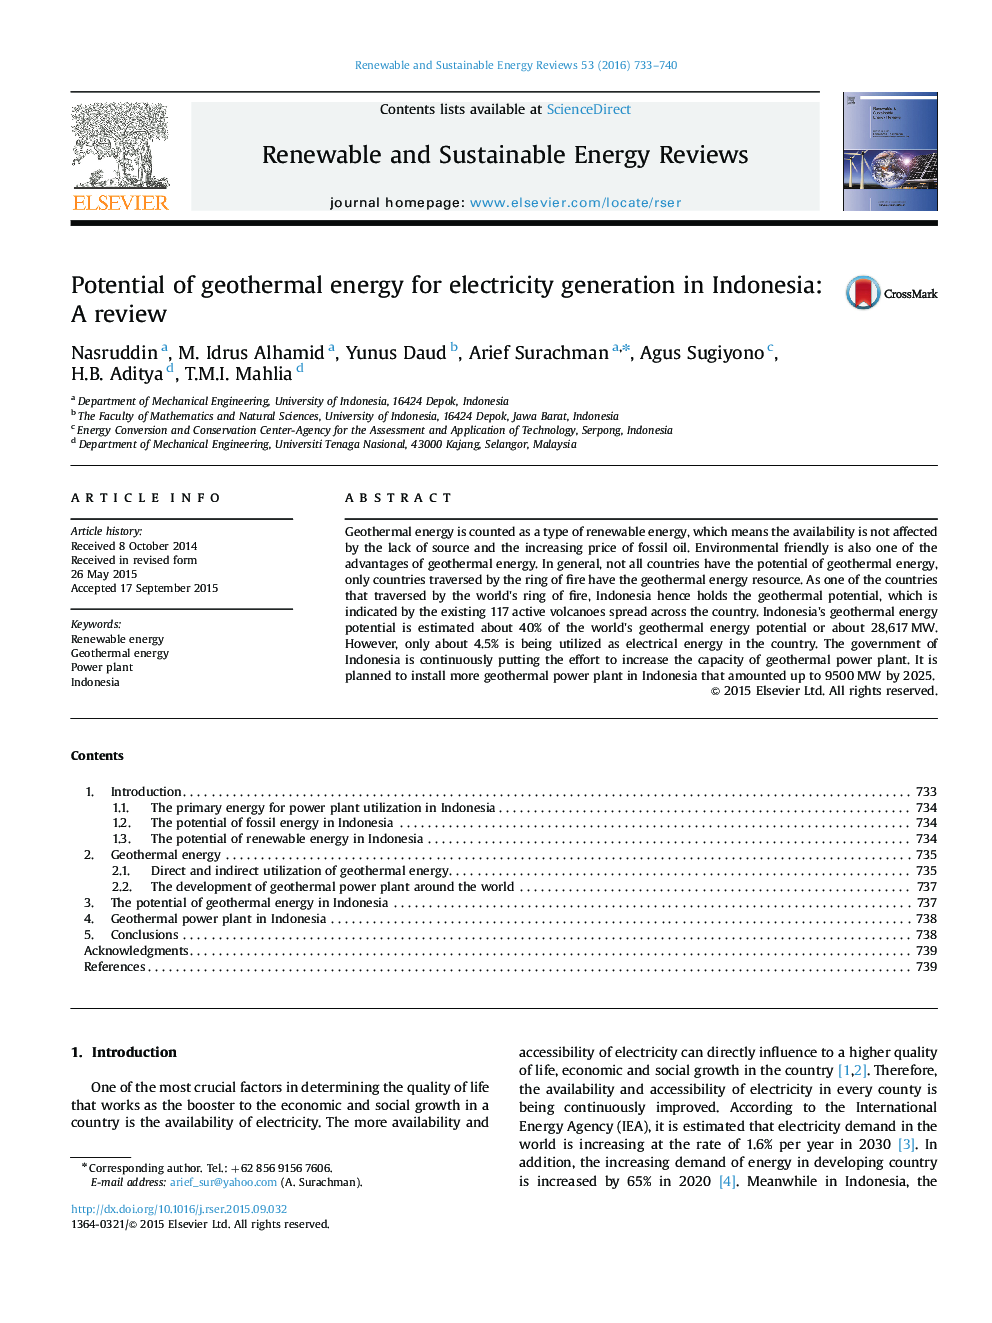 Potential of geothermal energy for electricity generation in Indonesia: A review